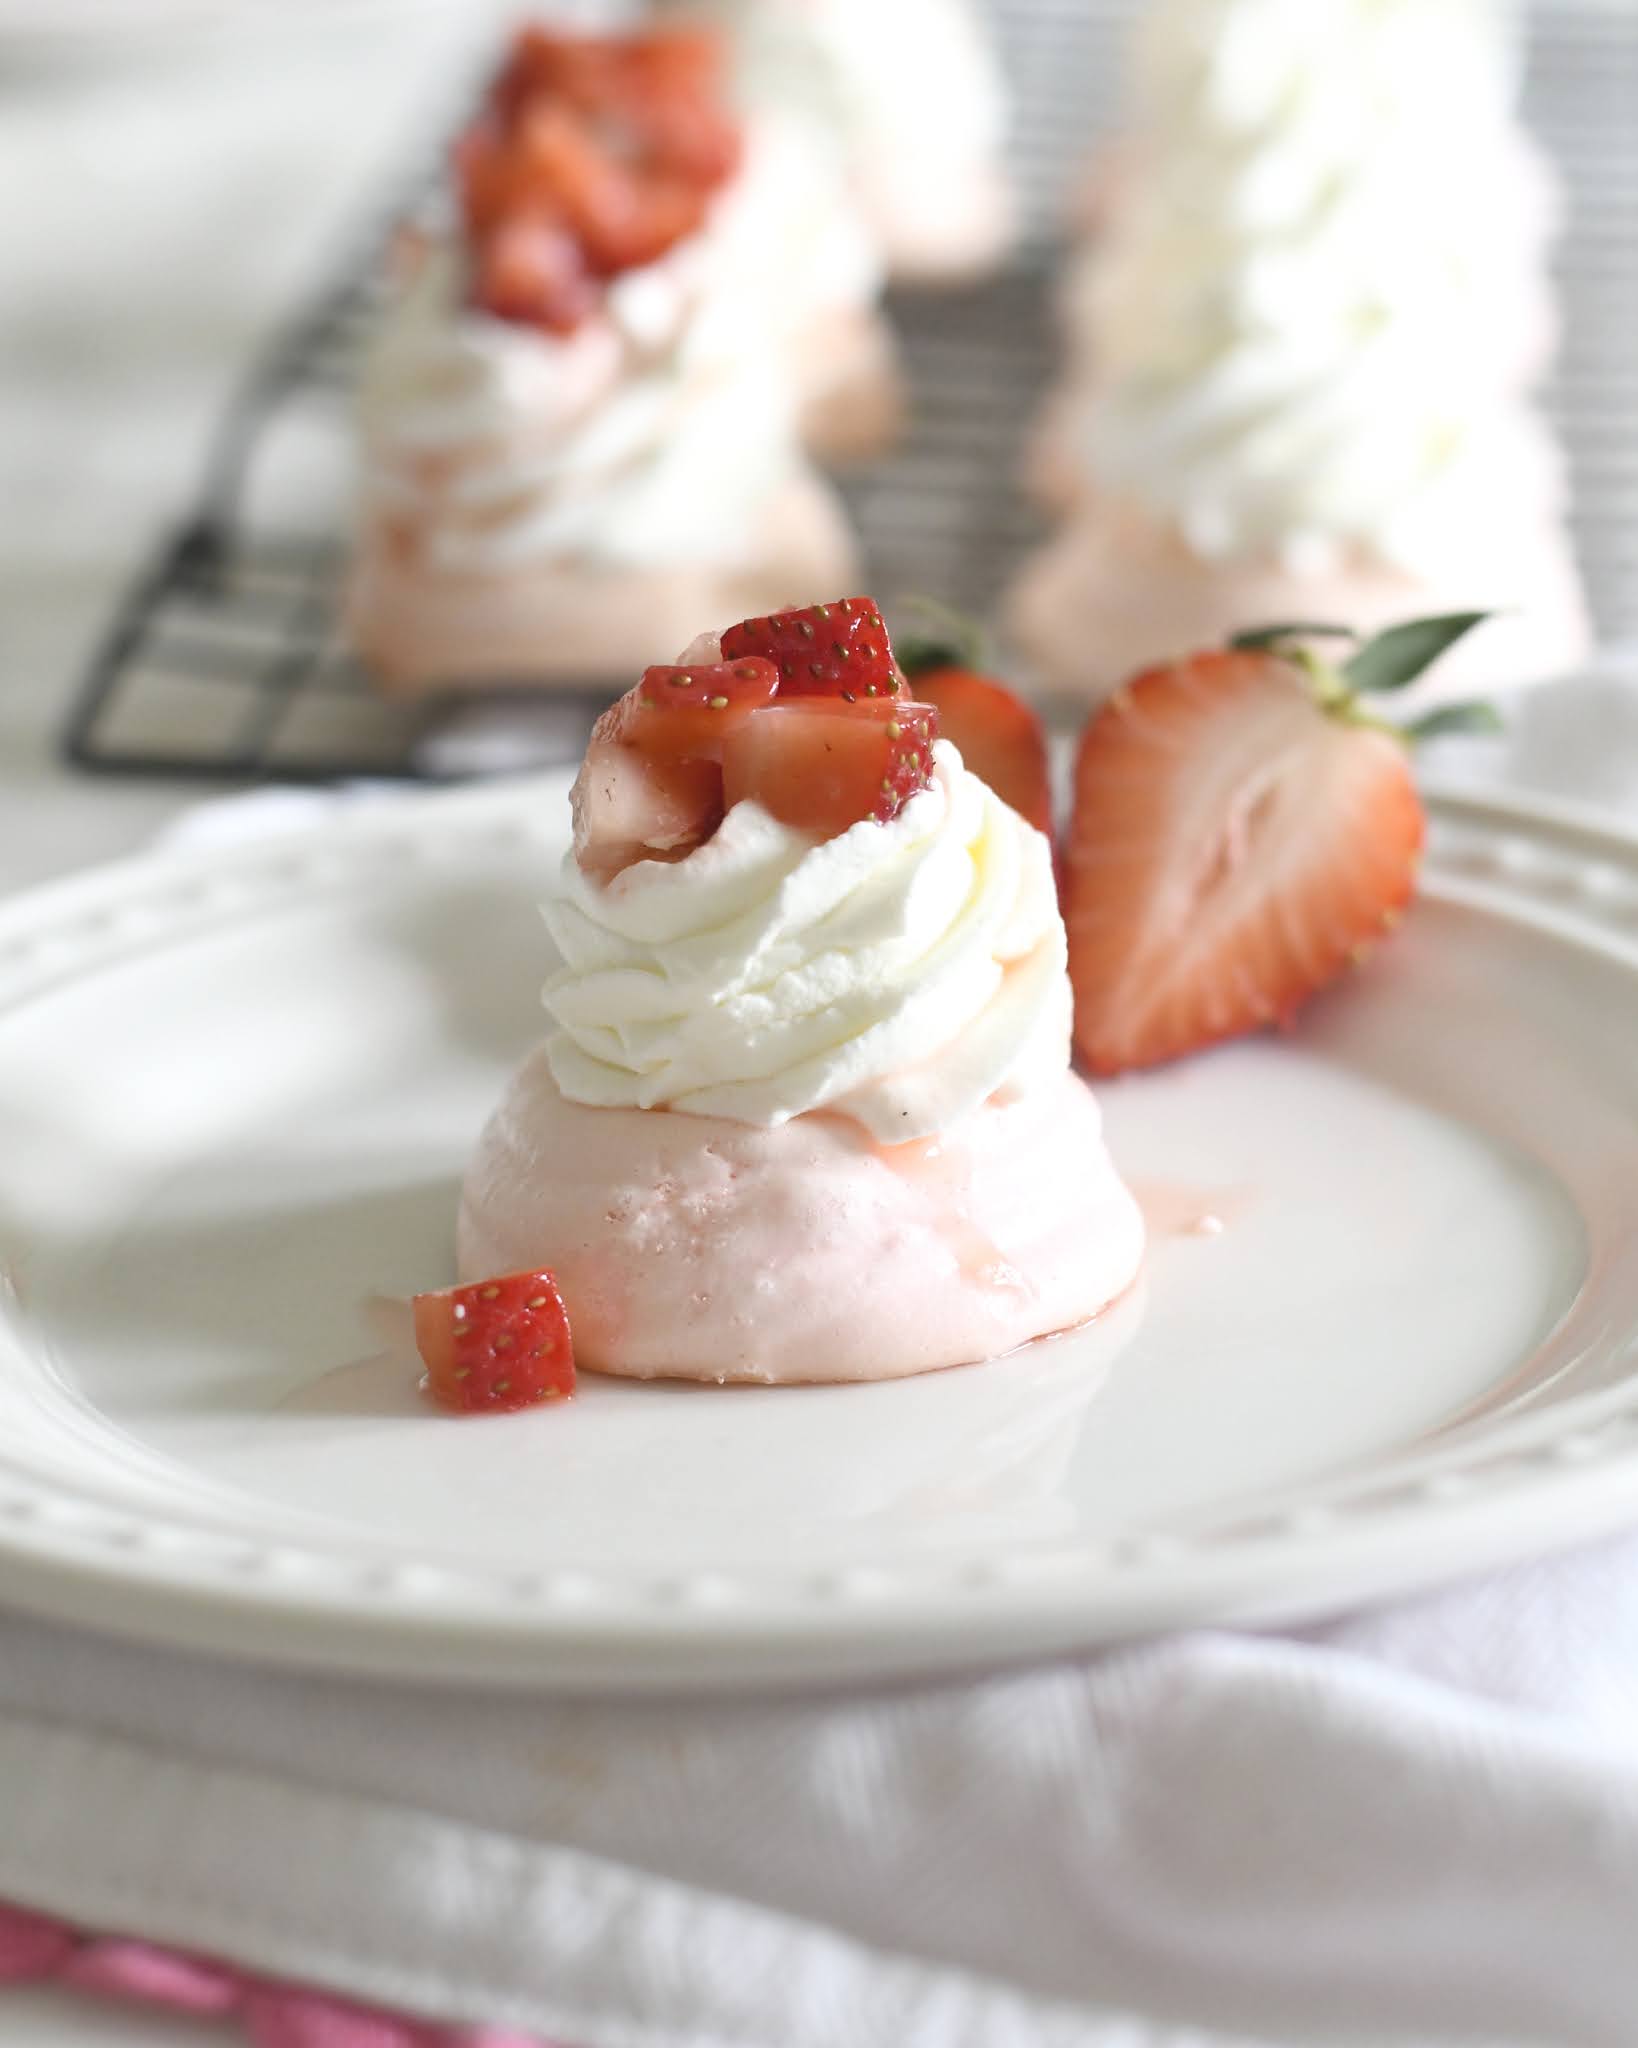 Cooking with Manuela: Mini Pavlova with Whipped Cream and Strawberries